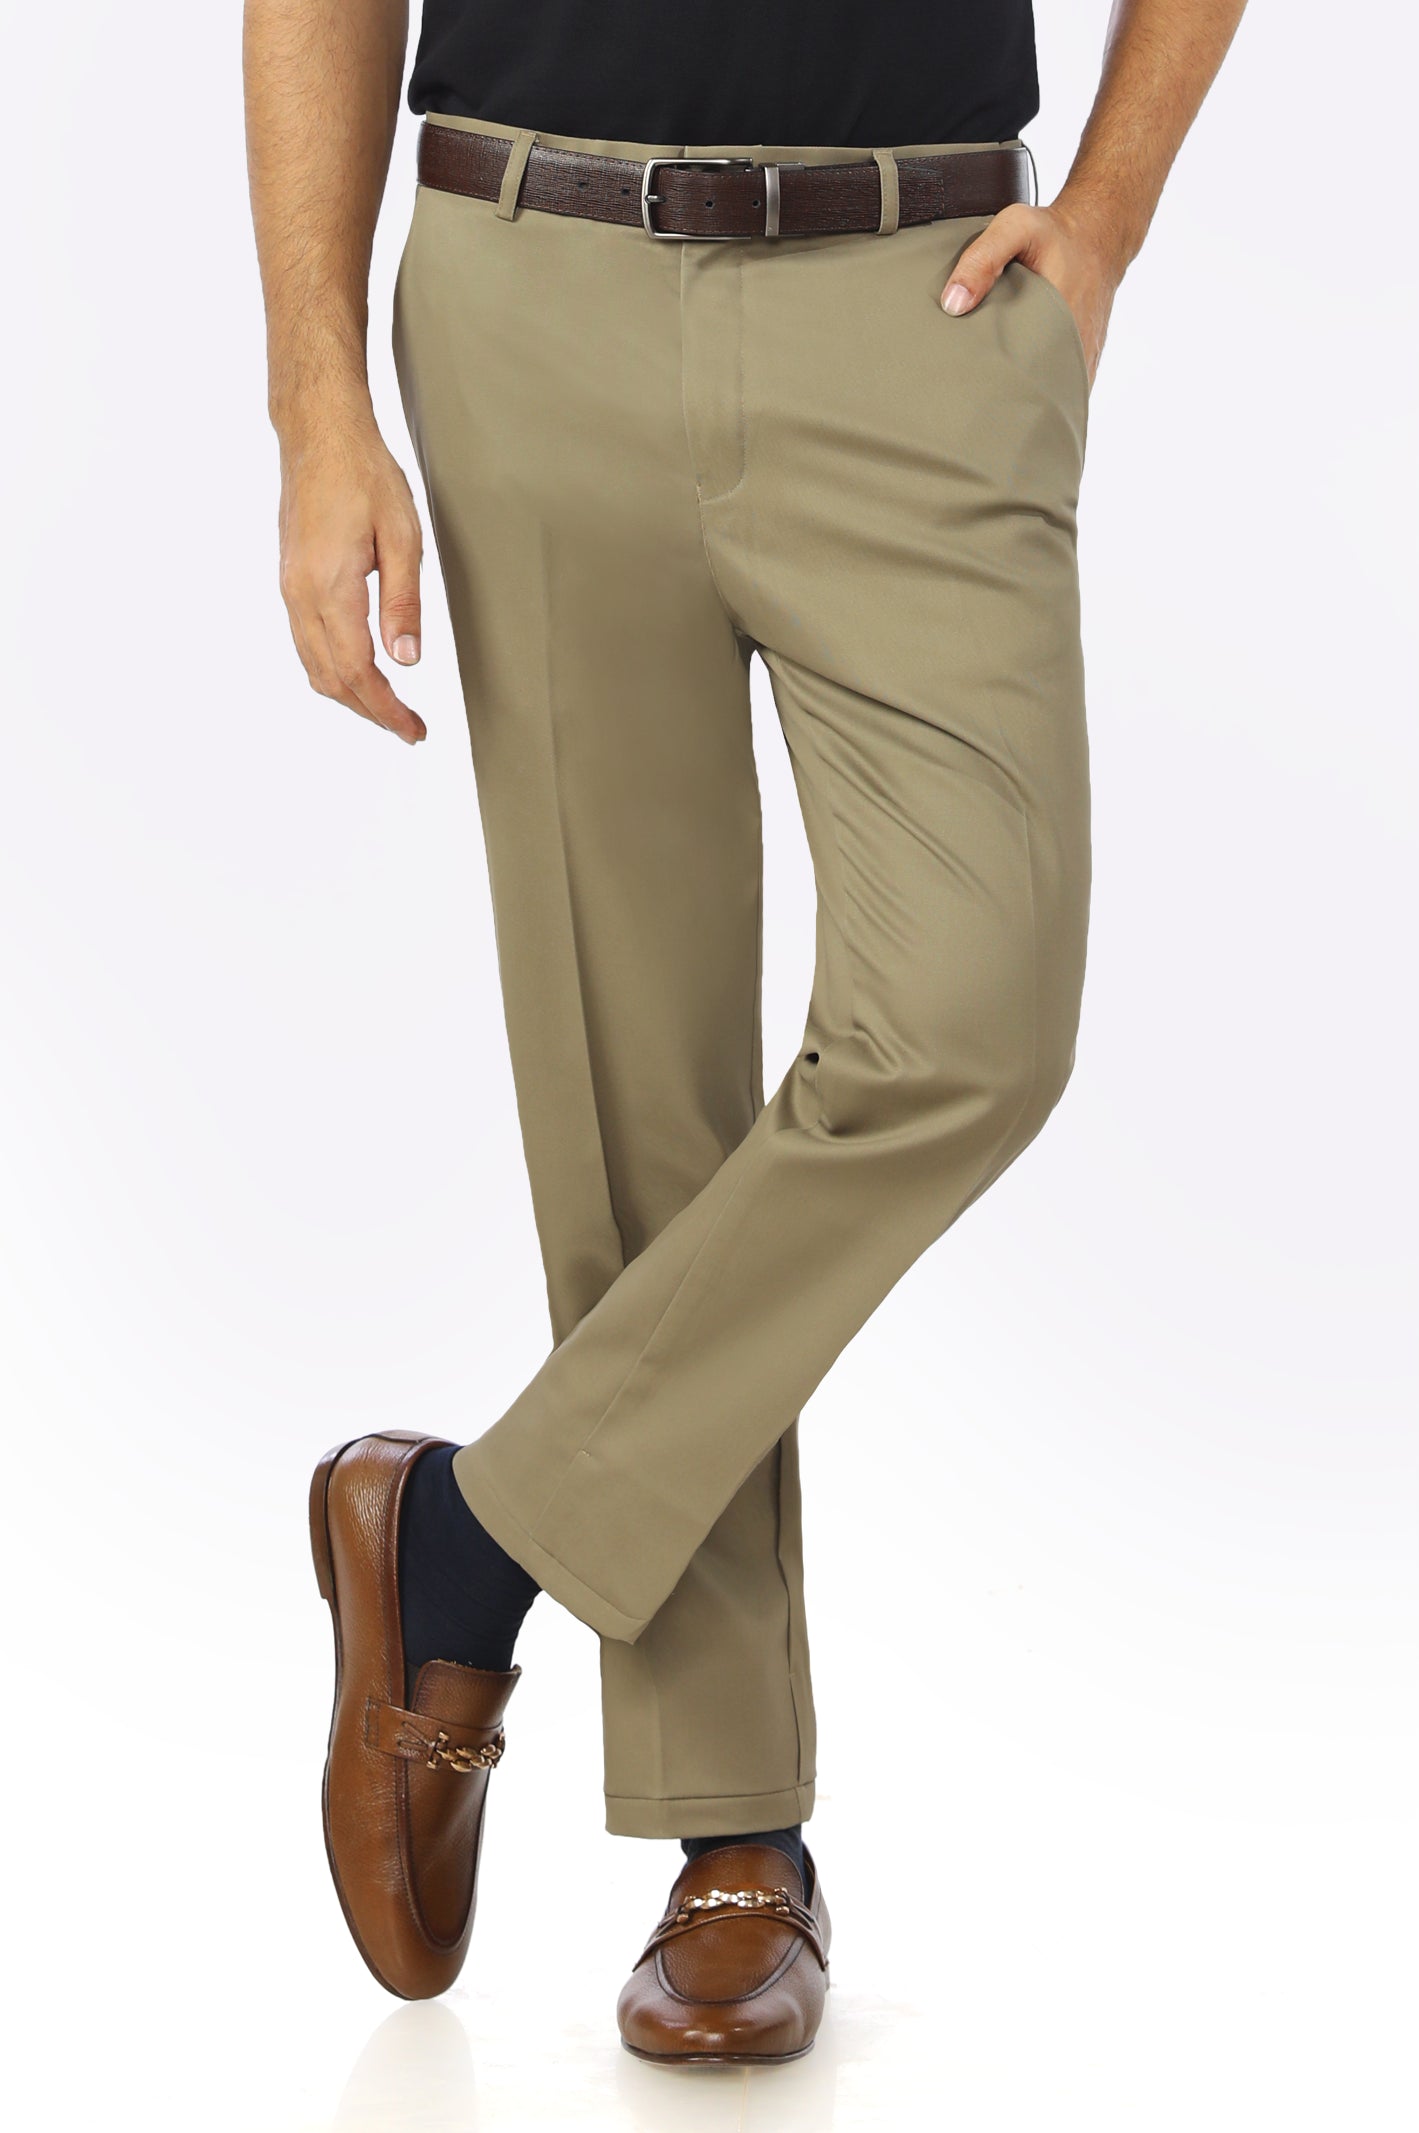 Brown Formal Cotton Trouser From Diners